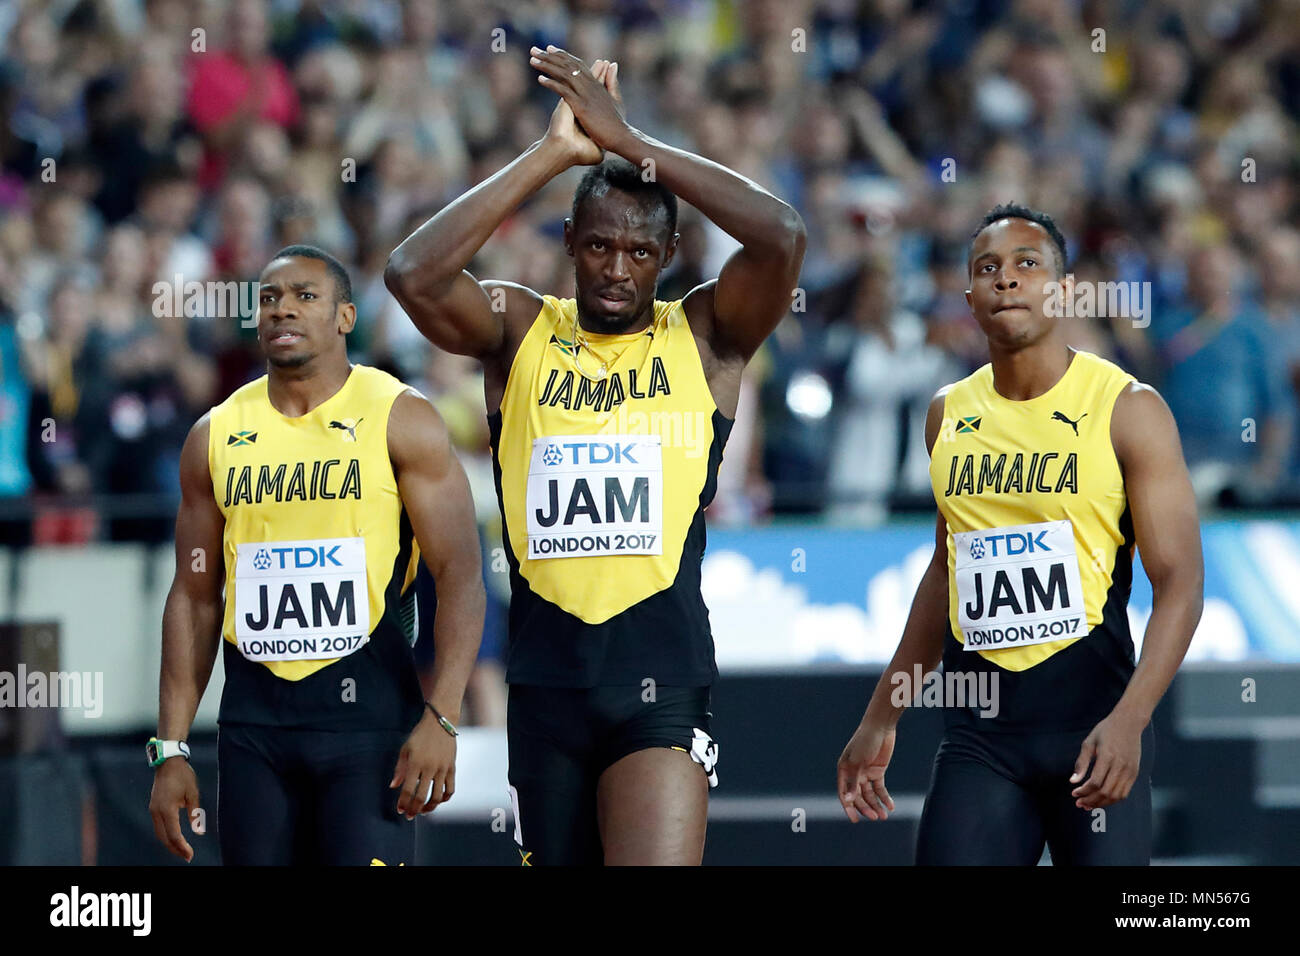 LONDON, ENGLAND - AUGUST 12: Usain Bolt of Jamaica leaving with team mates Tyquendo Tracey, Julian Forte and Michael Campbell after falling in the Men's 4x100 Relay final during day nine of the 16th IAAF World Athletics Championships London 2017 at The London Stadium on August 12, 2017 in London, United Kingdom --- Image by © Paul Cunningham Stock Photo